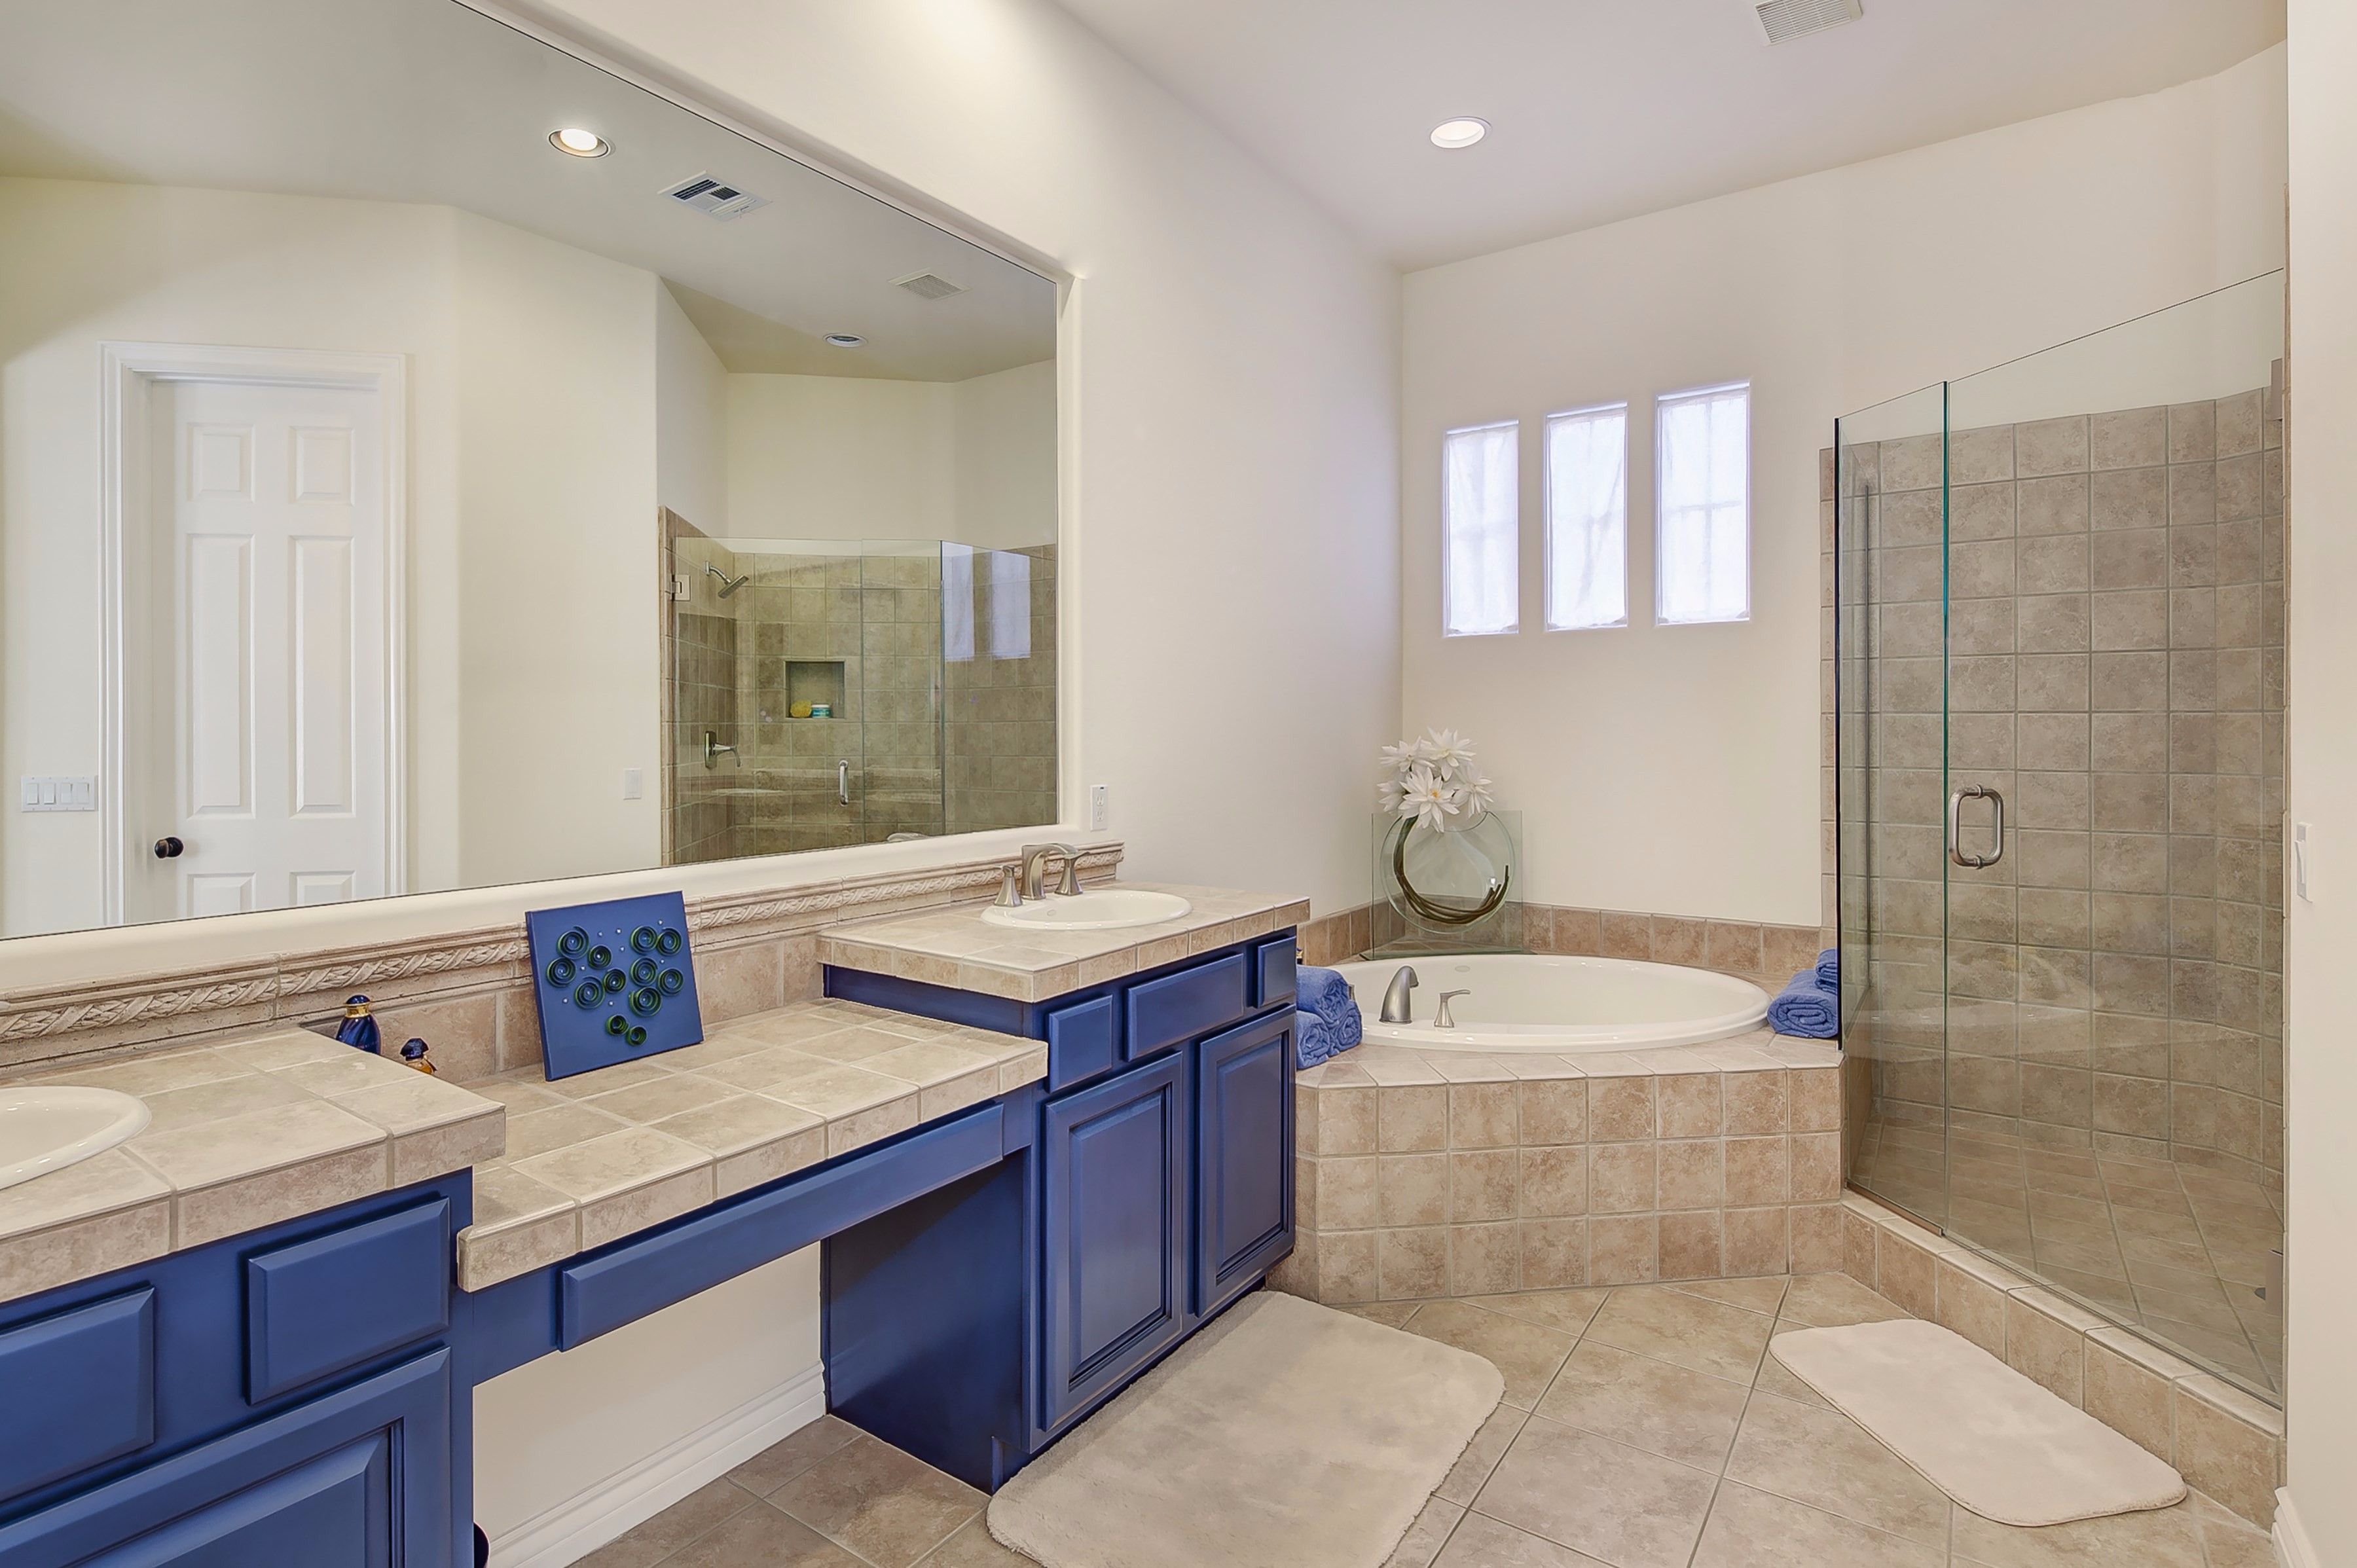 Separate shower and soaking tub at this Scottsdale home for sale in DC Ranch located at 8867 E Mountain Spring Rd Scottsdale, AZ 85255 listed by Don Matheson at The Matheson Team